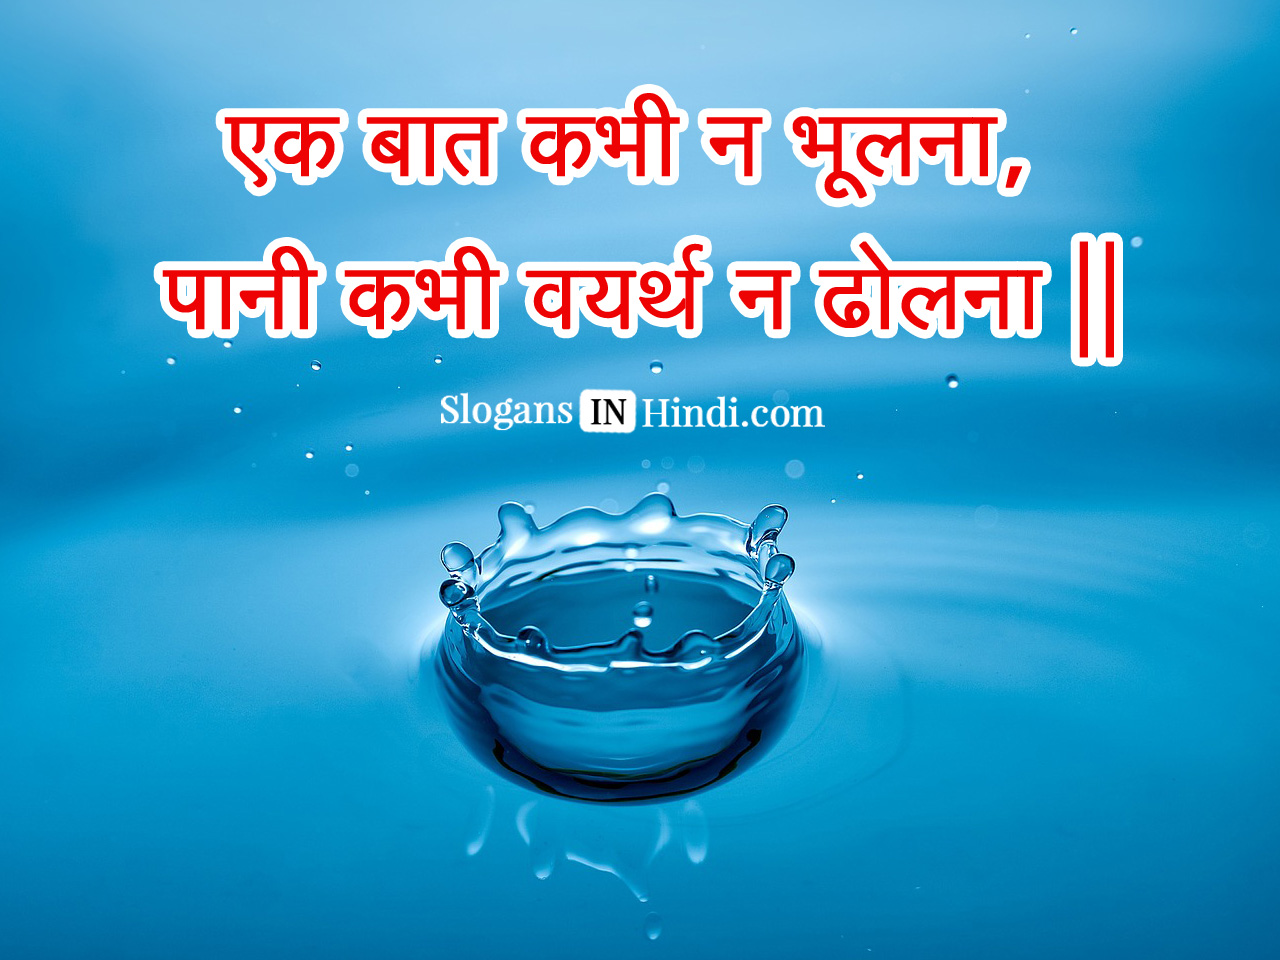 slogans on water conservation essay in hindi